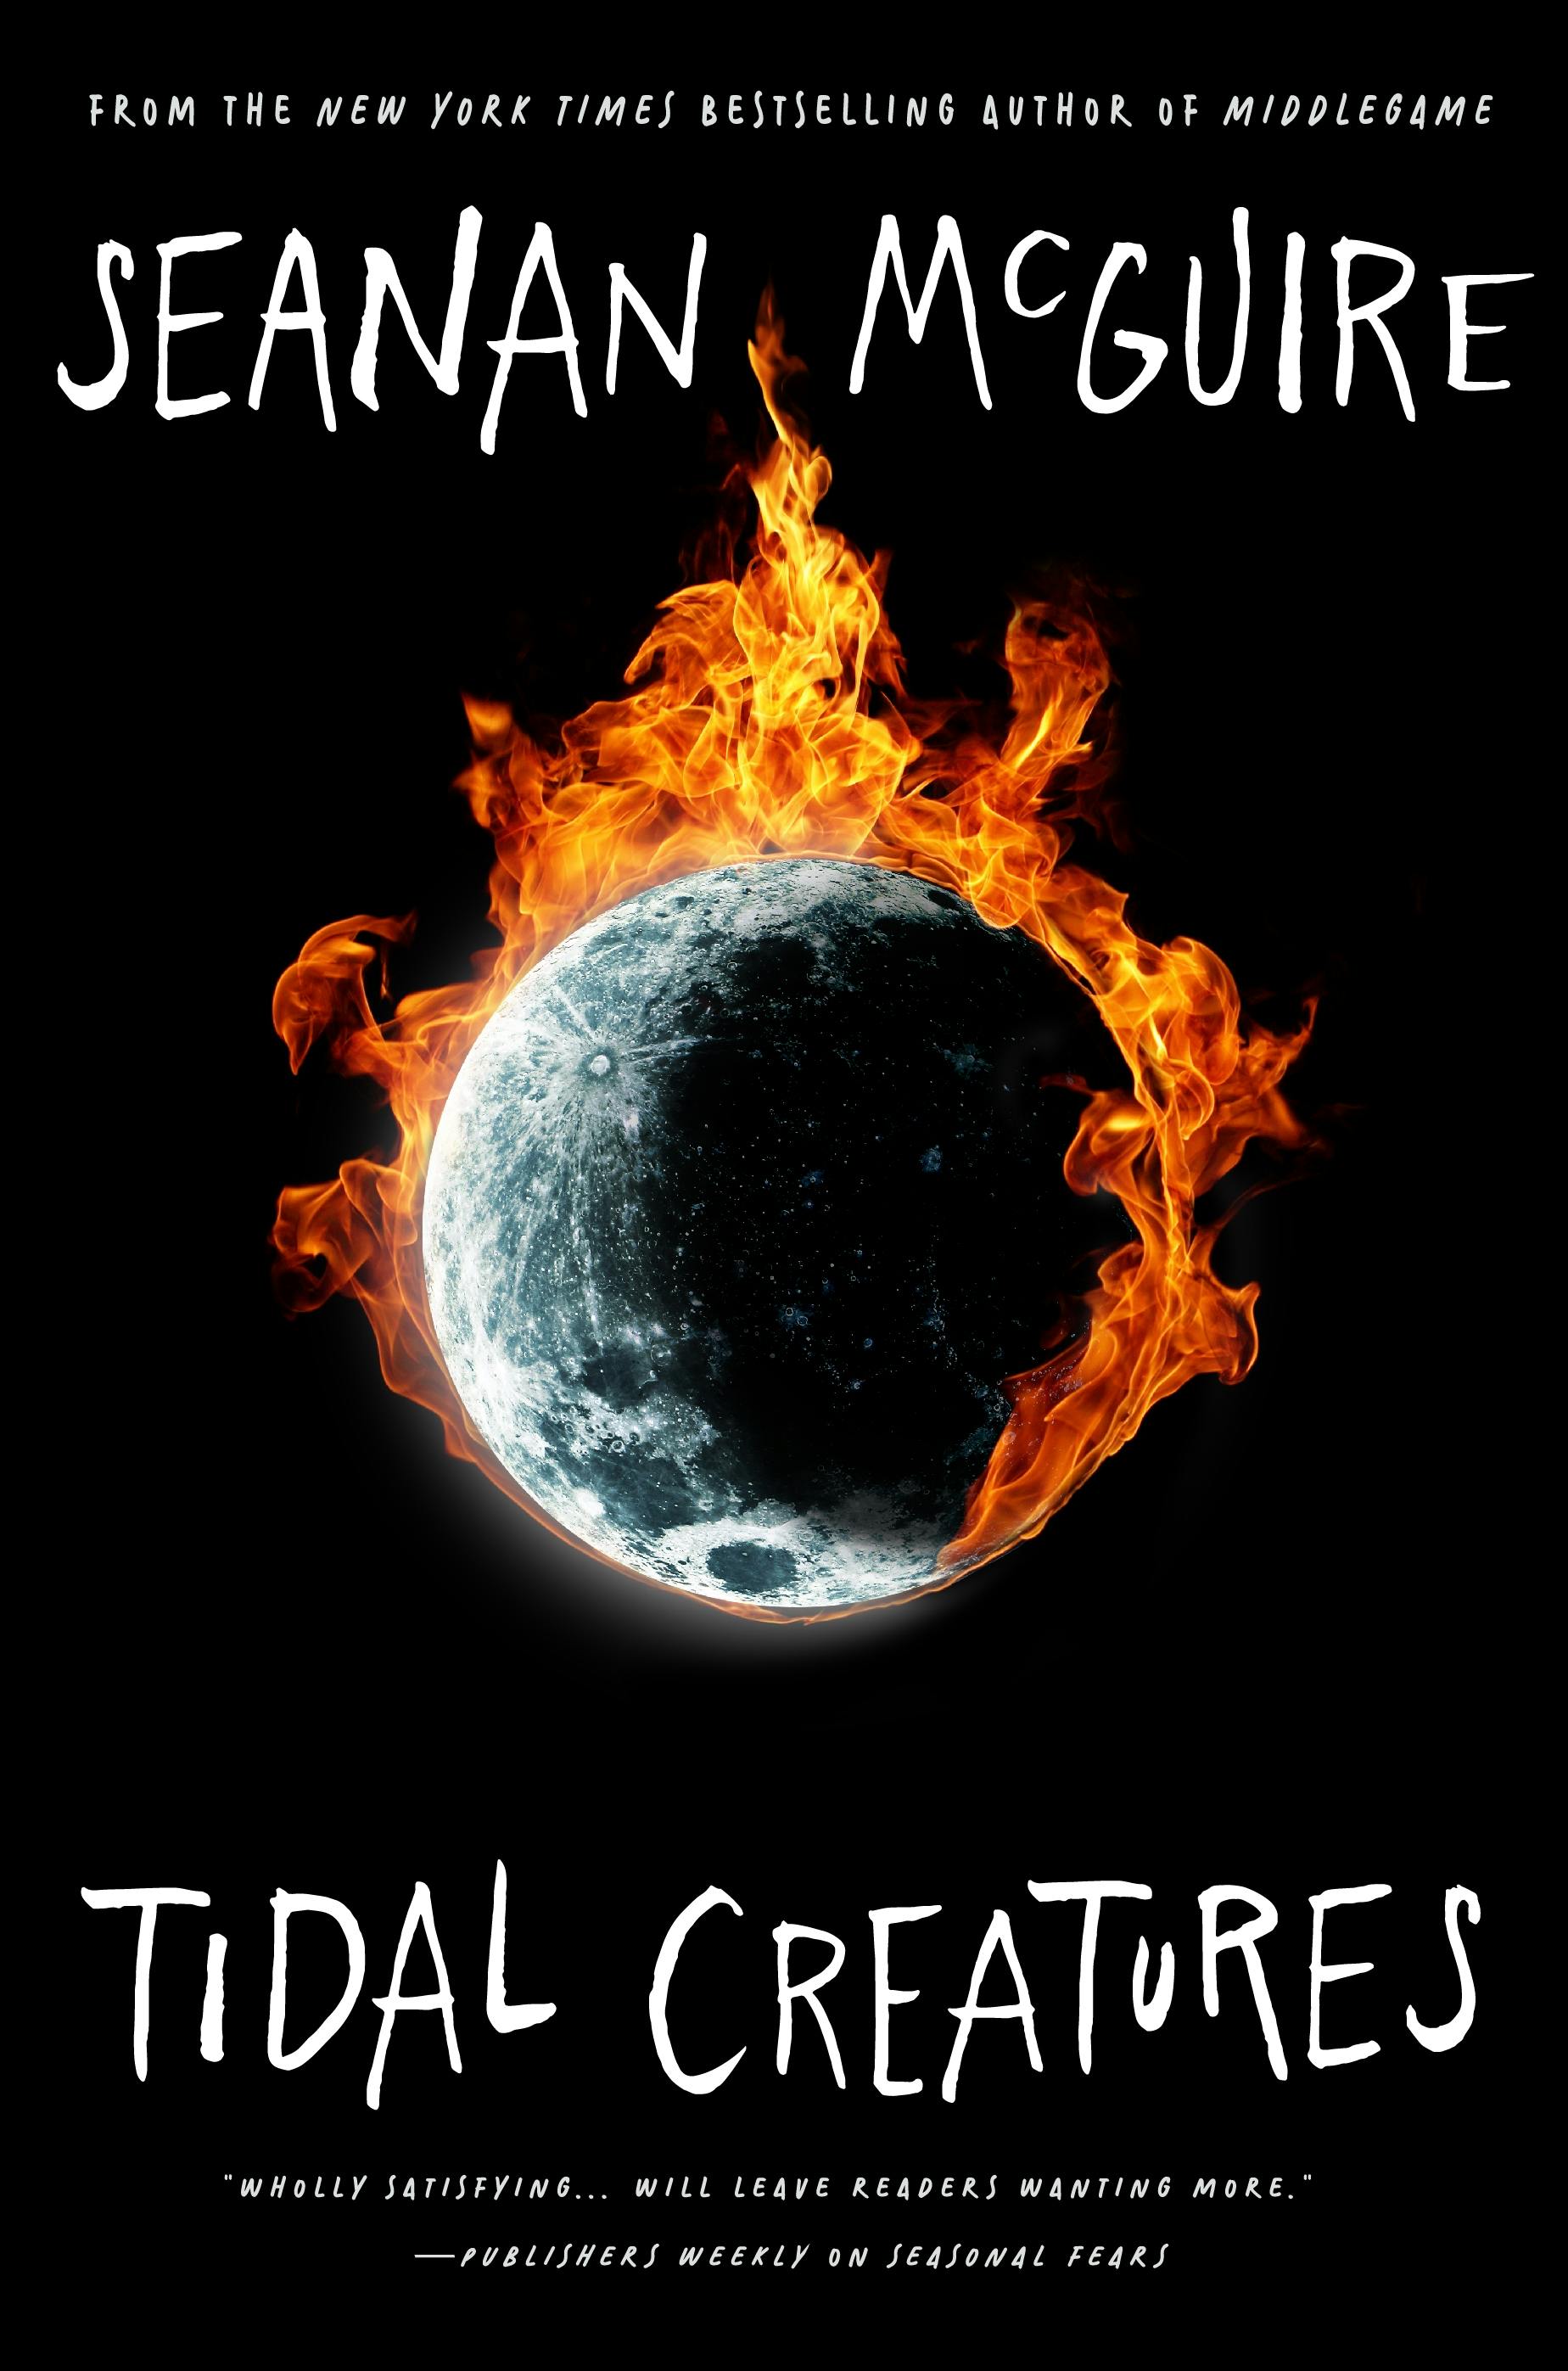 Cover for the book titled as: Tidal Creatures